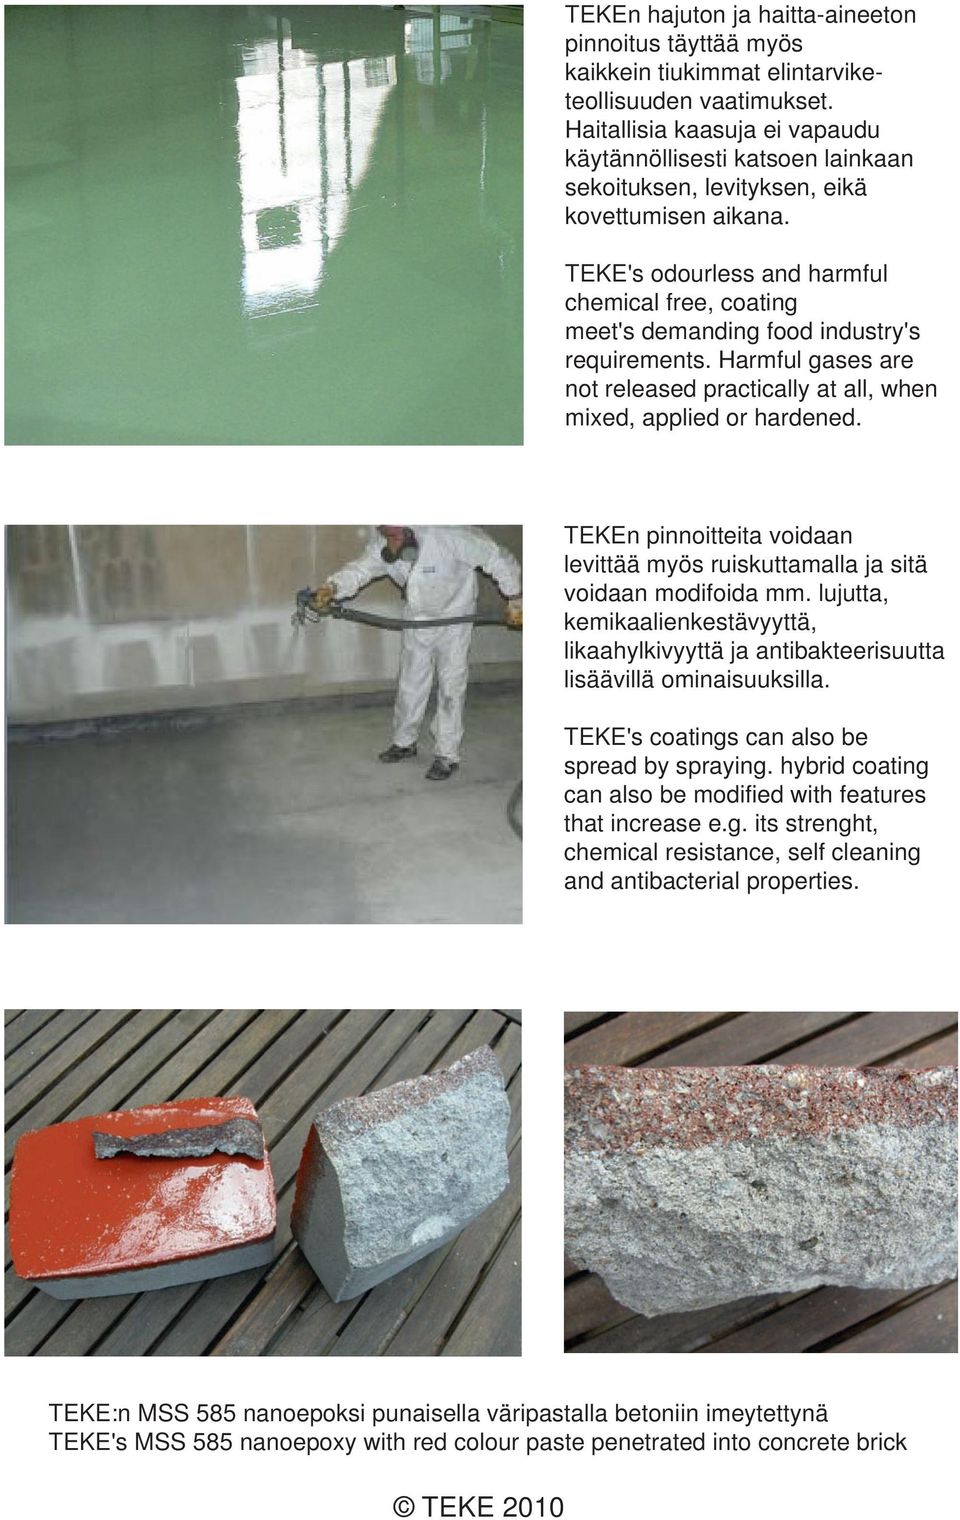 TEKE's odourless and harmful chemical free, coating meet's demanding food industry's requirements. Harmful gases are not released practically at all, when mixed, applied or hardened.